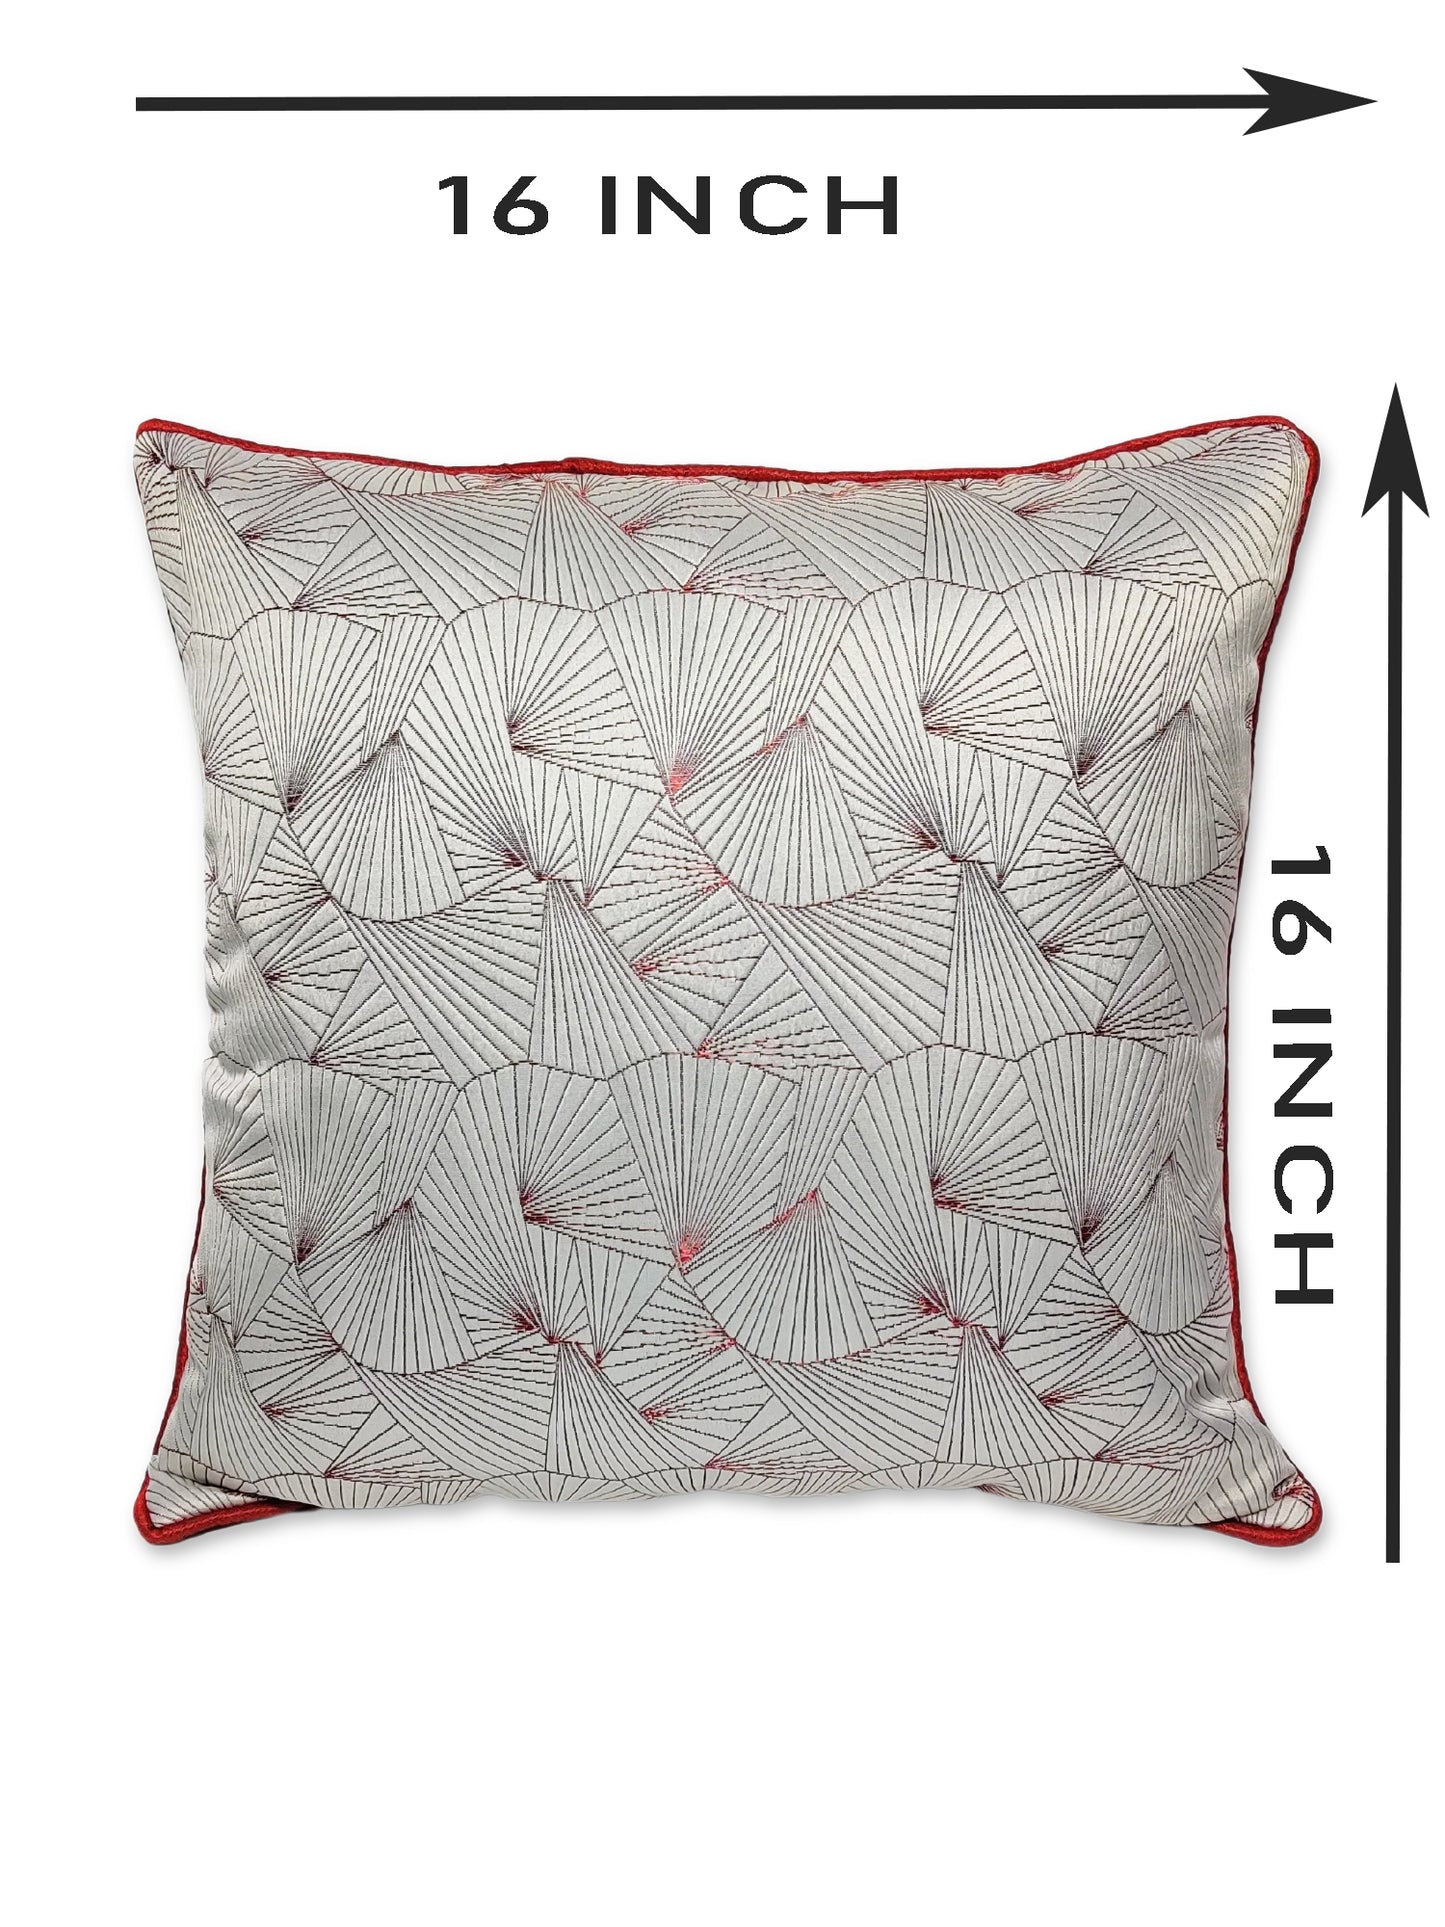 ARTSY® Red and White Cushion Cover Set - Pack of 5: Vibrant Home Decor Accent for Every Season